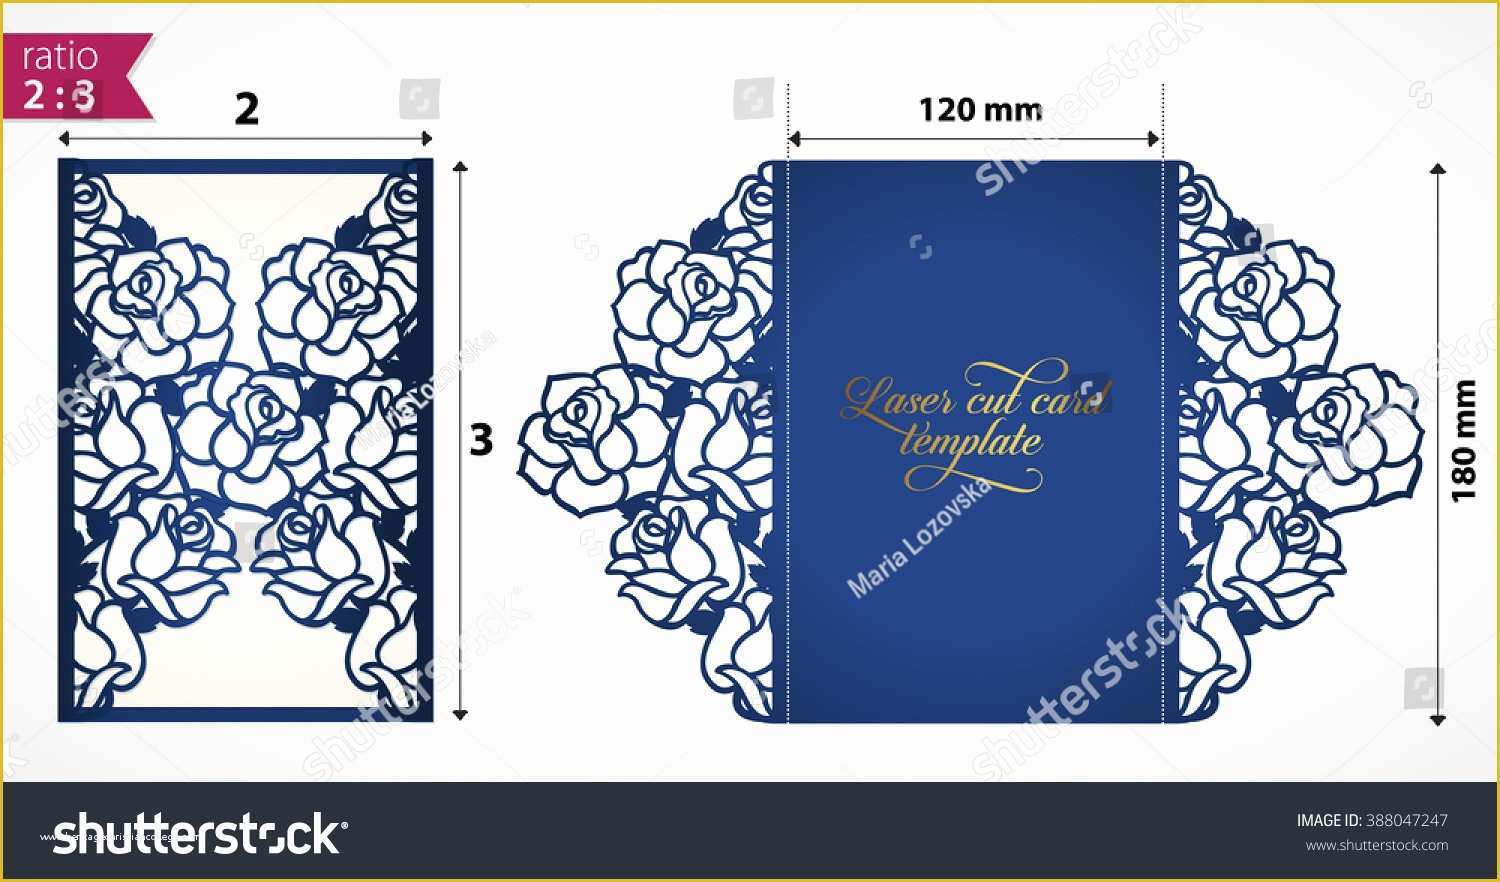 Free Die Cut Templates Of Laser Cut Wedding Invitation Template with Roses Vector